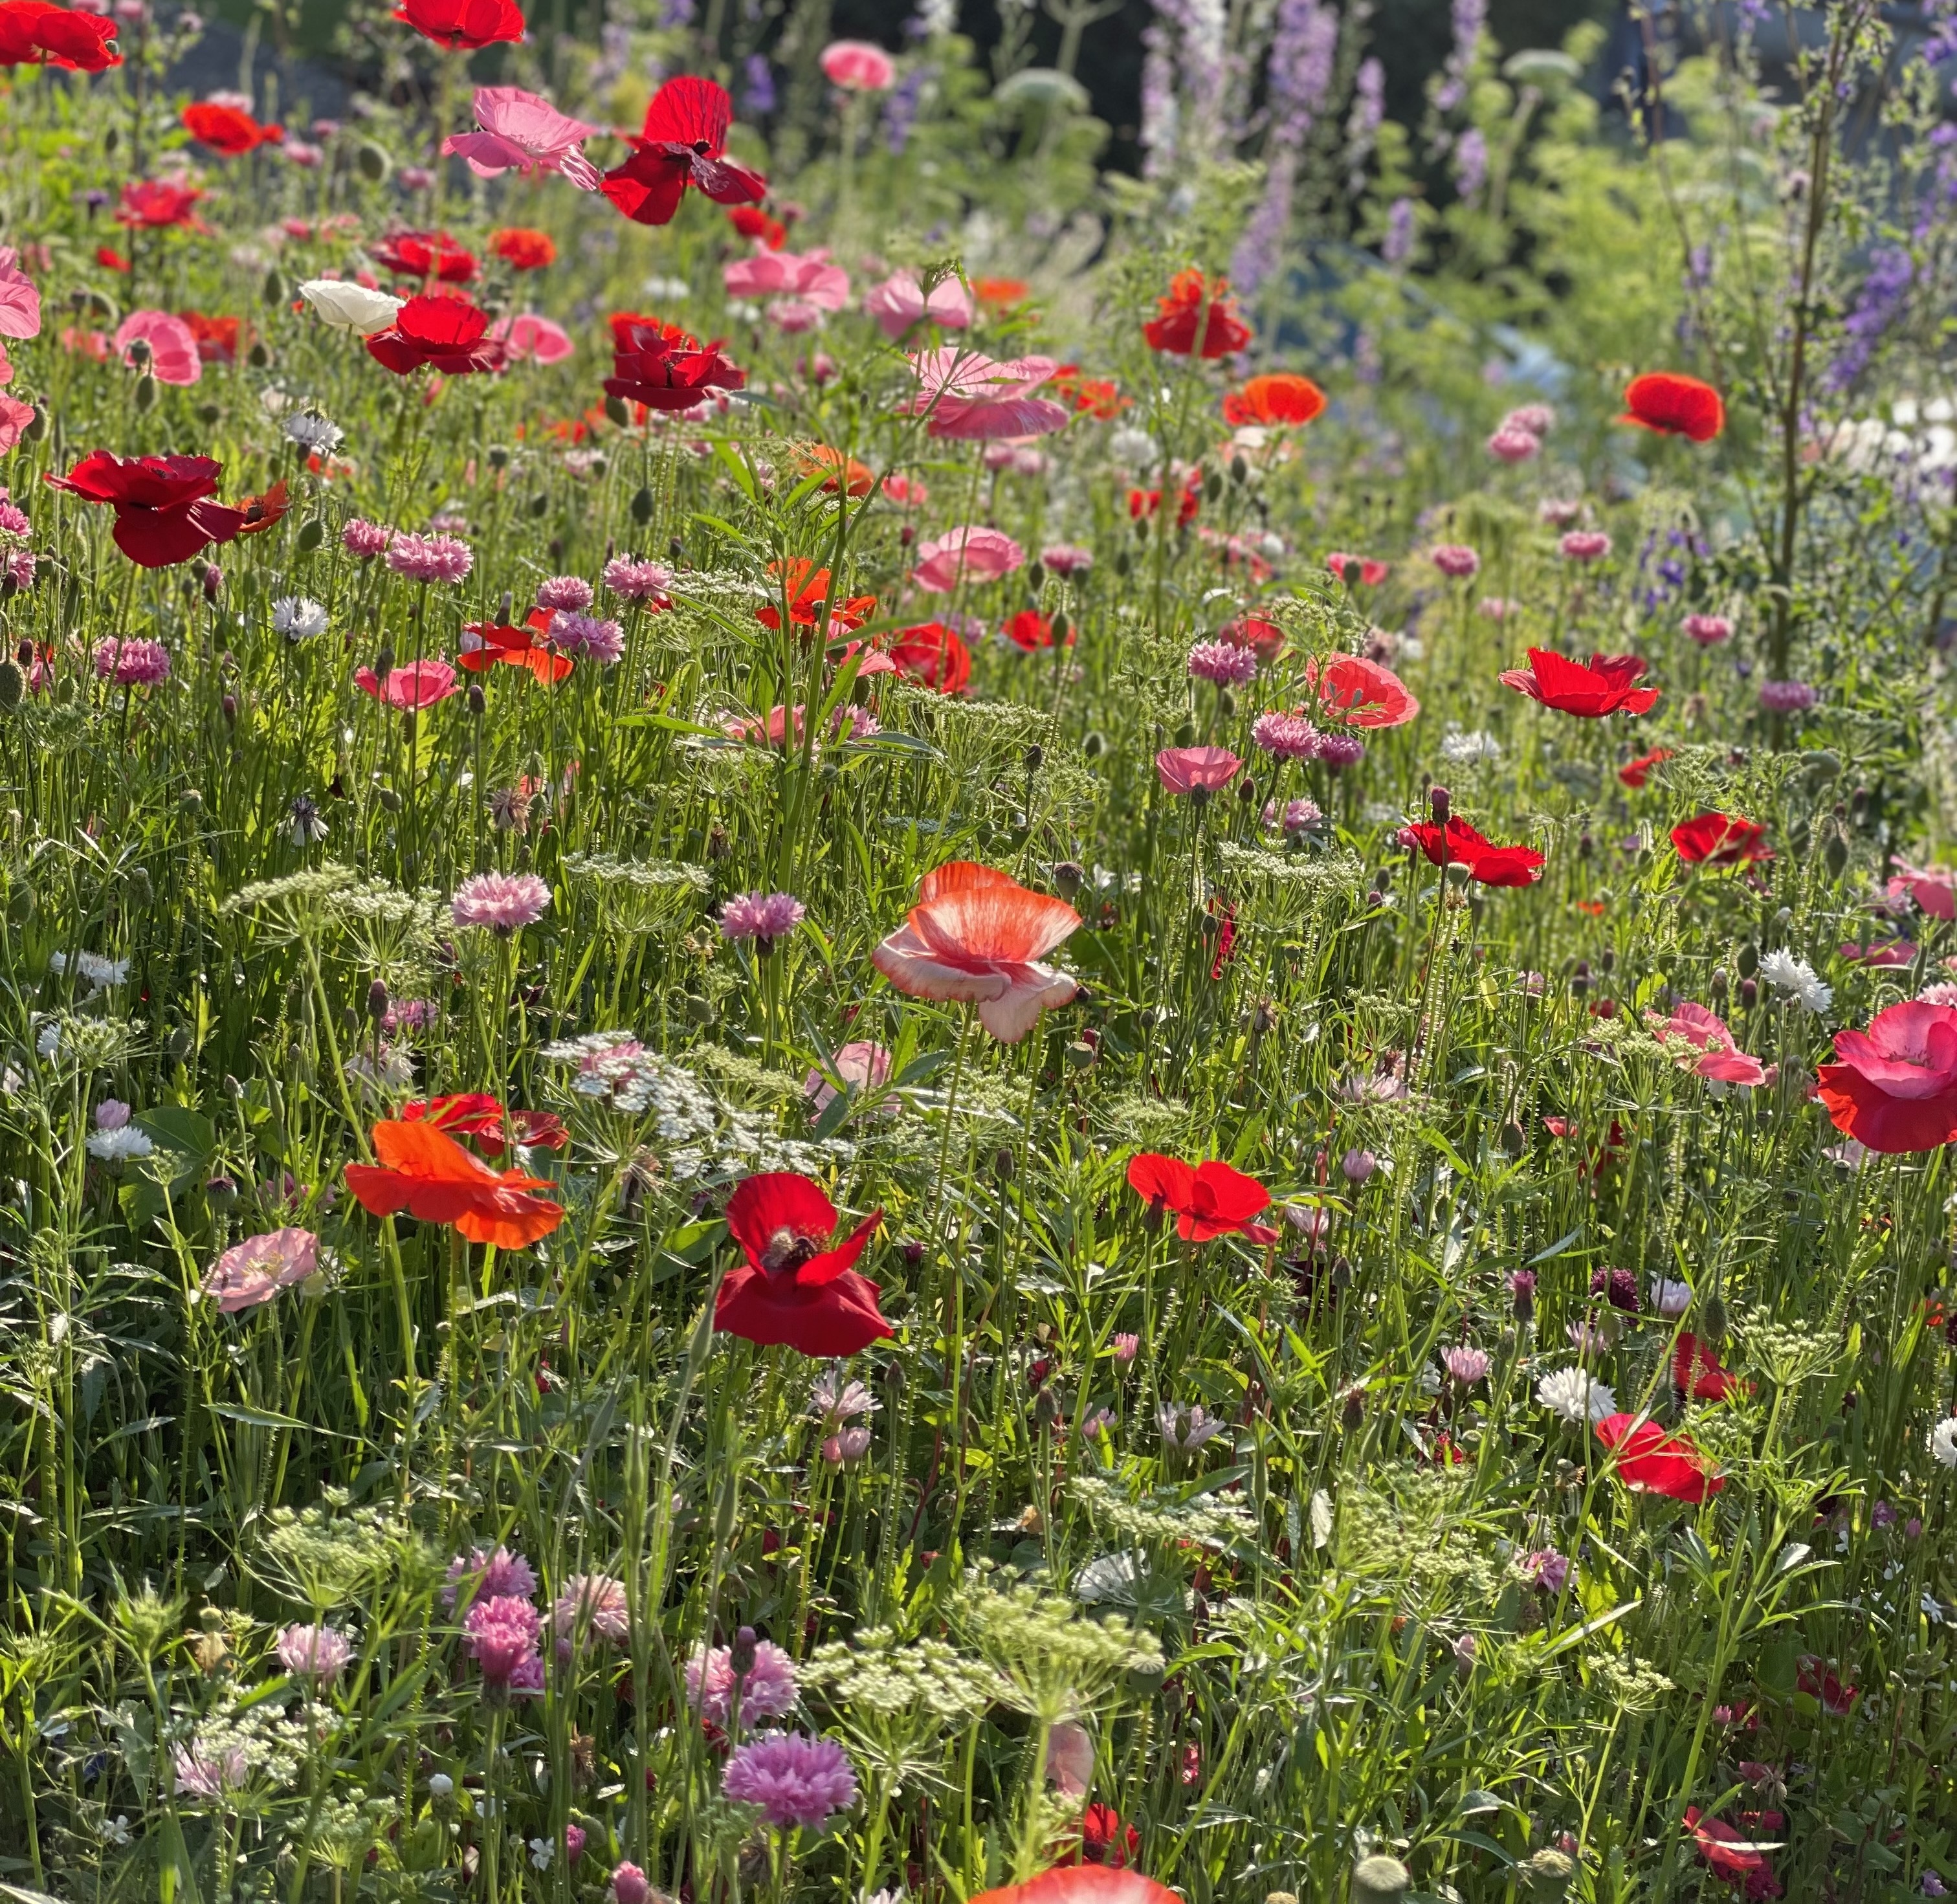 Meadow with predominently red a white flowers including poppies